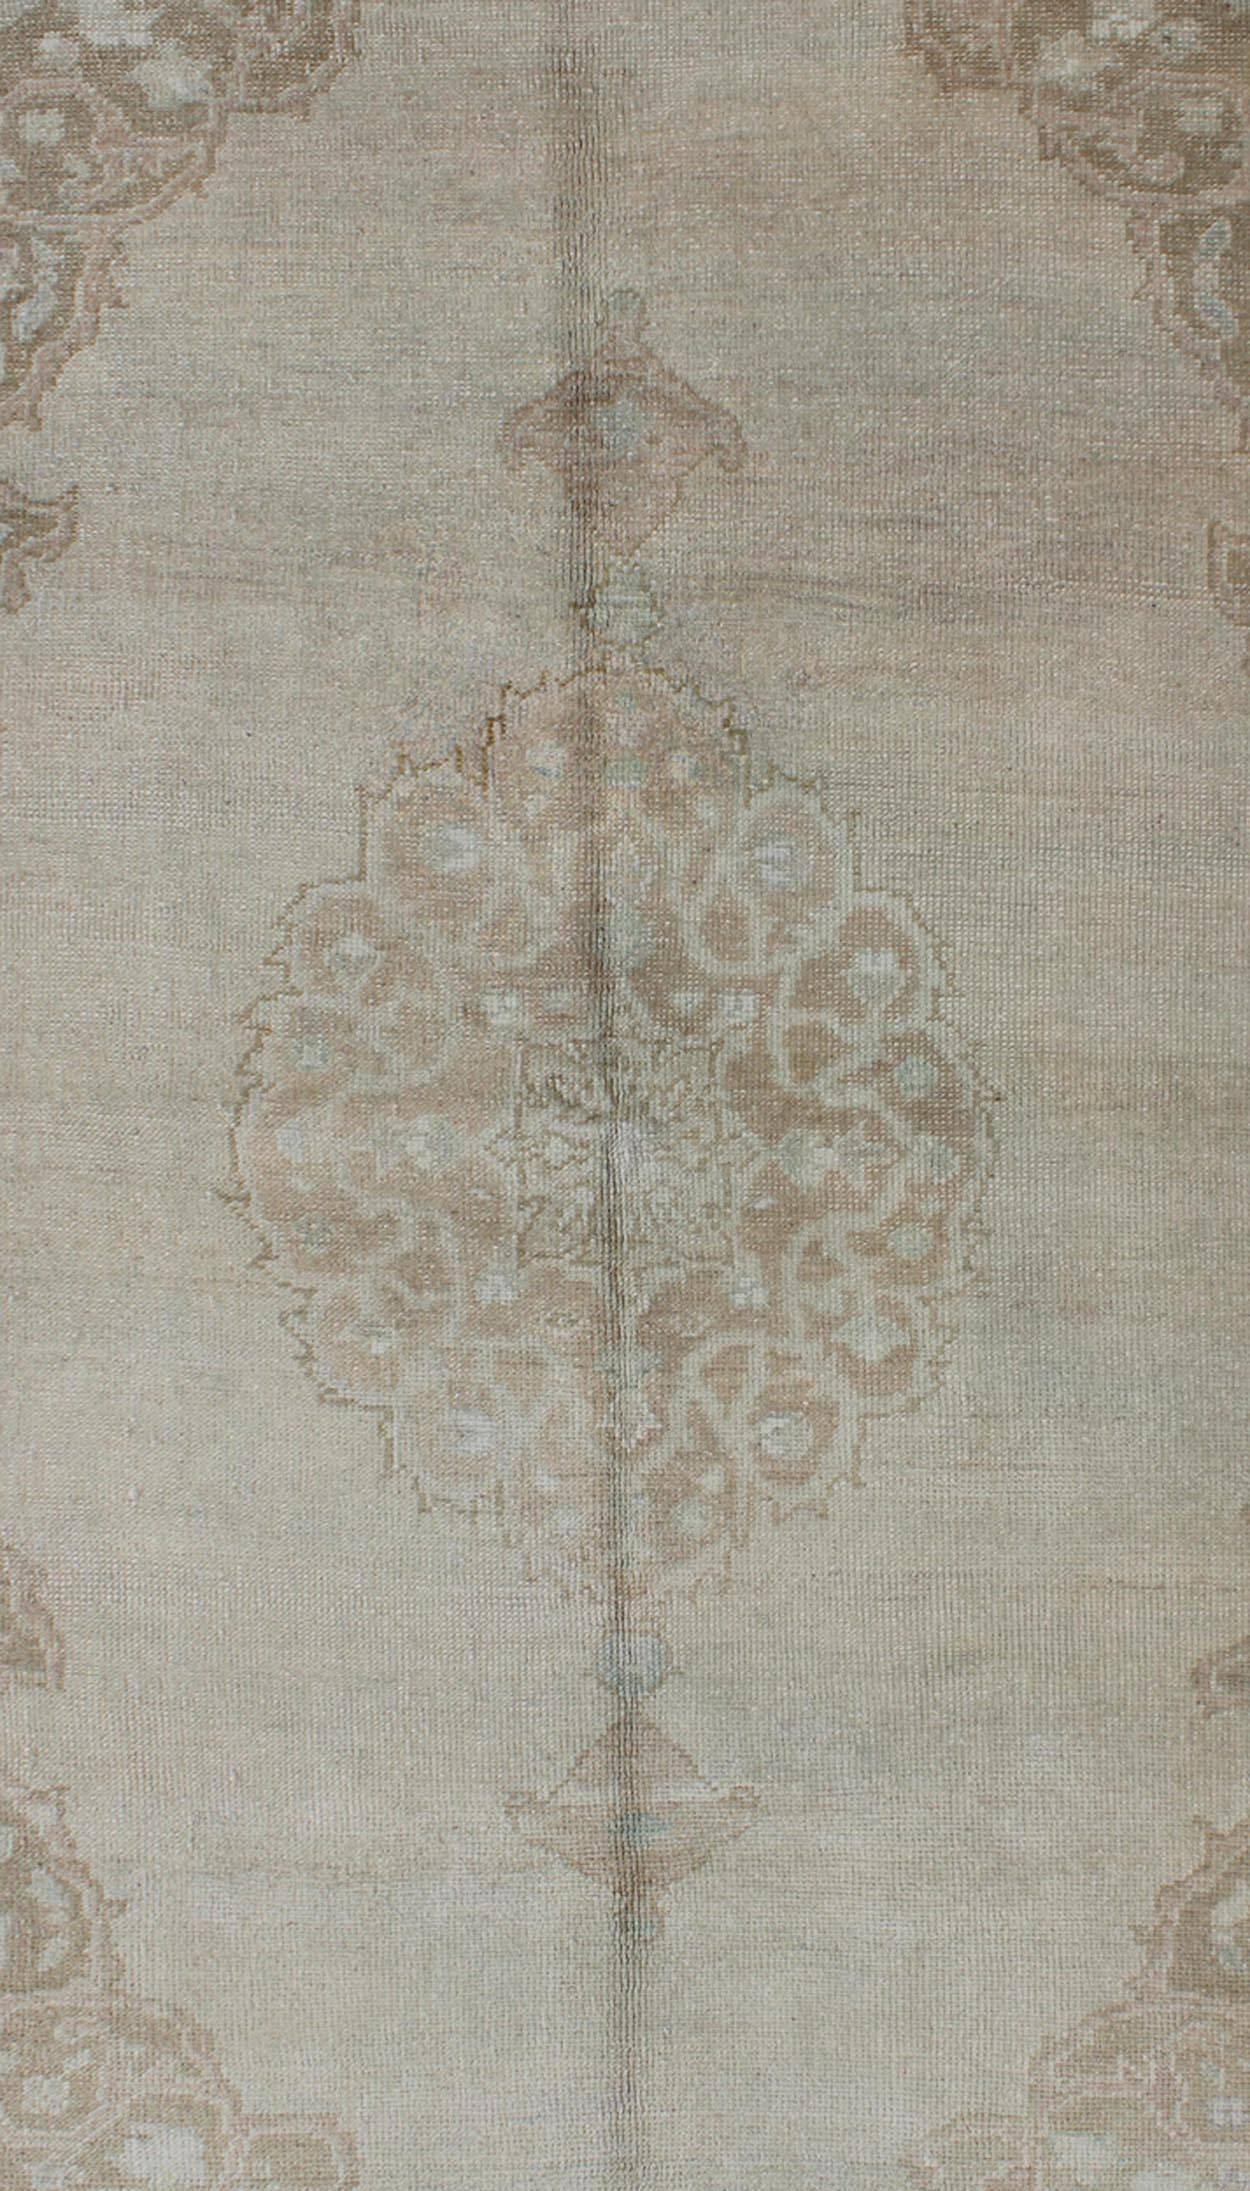 Hand-Knotted Turkish Oushak Rug with Floral Medallion, Cornices and Border in Gray and Brown